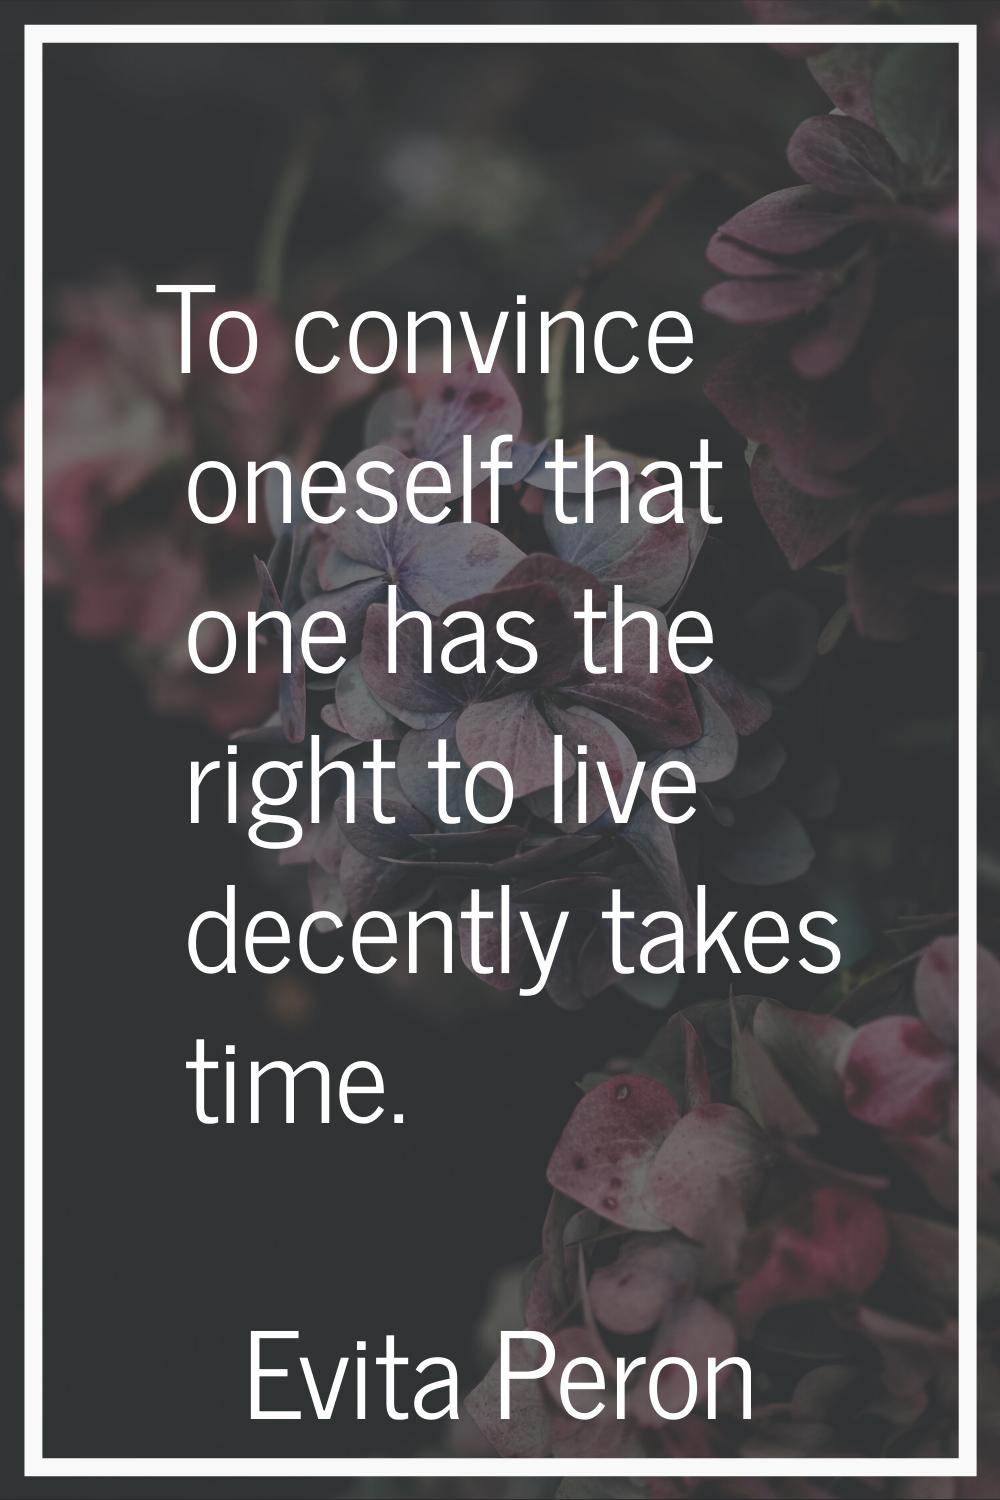 To convince oneself that one has the right to live decently takes time.